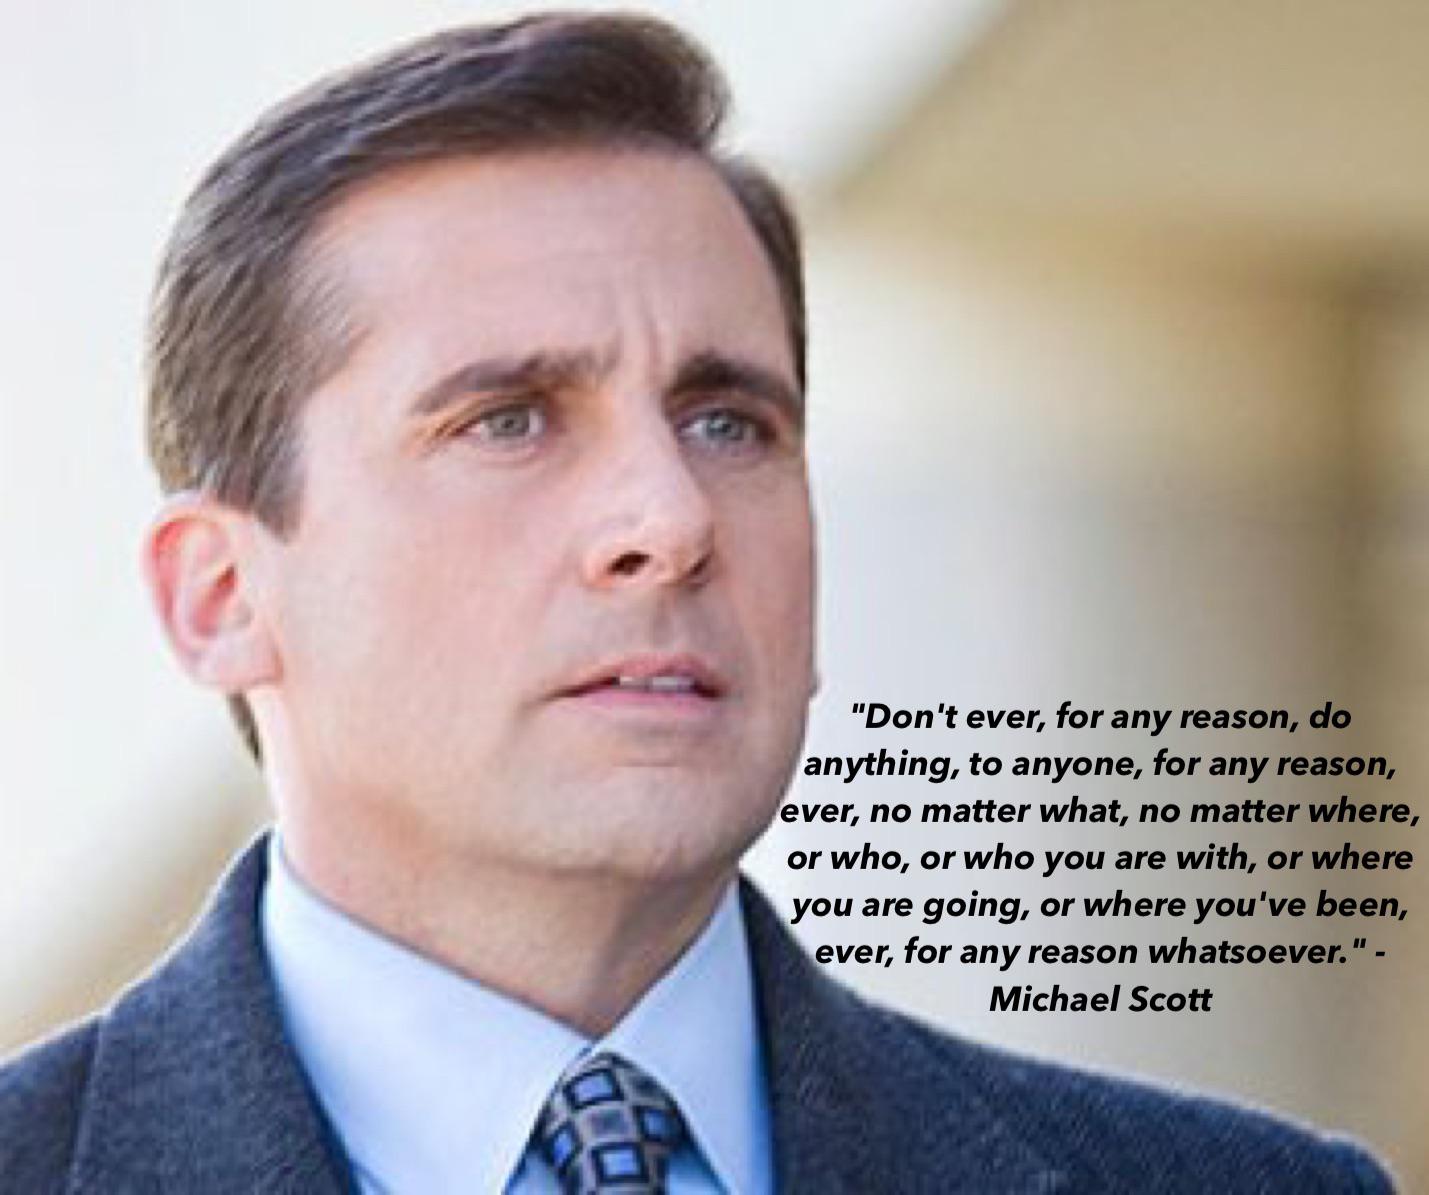 the office - white collar worker - "Don't ever, for any reason, do anything, to anyone, for any reason, ever, no matter what, no matter where, or who, or who you are with, or where you are going, or where you've been, ever, for any reason whatsoever." Mic